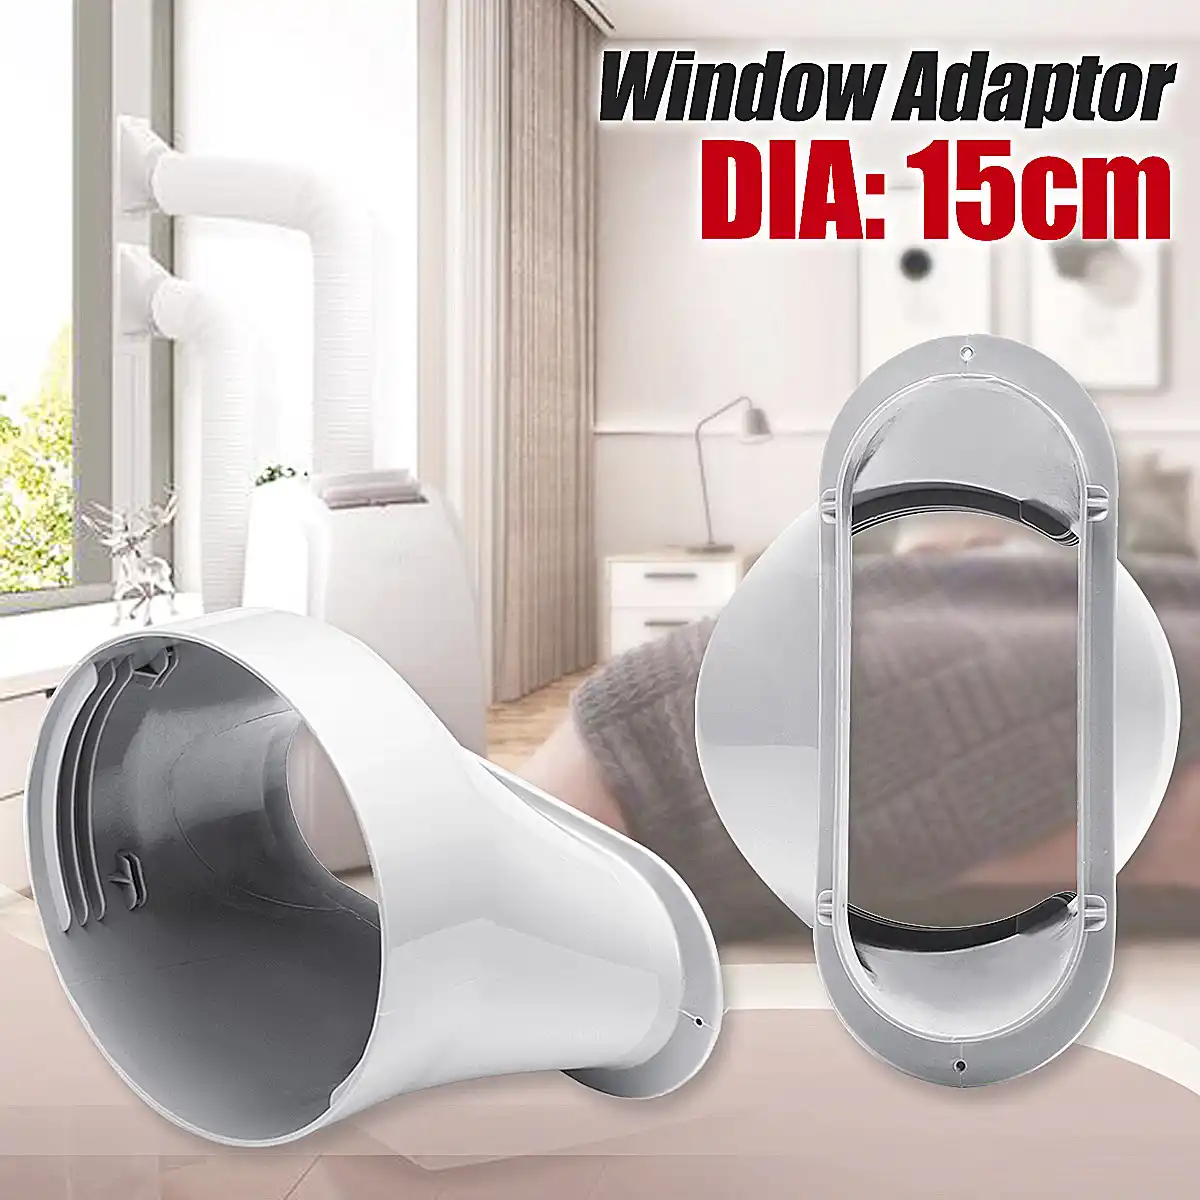 13cm Air Conditioner Window Adapter PVC Exhaust Pipe Flat Nozzle Portable Air Conditioner Exhaust Hose Connector Mobile Air Conditioning Accessories 